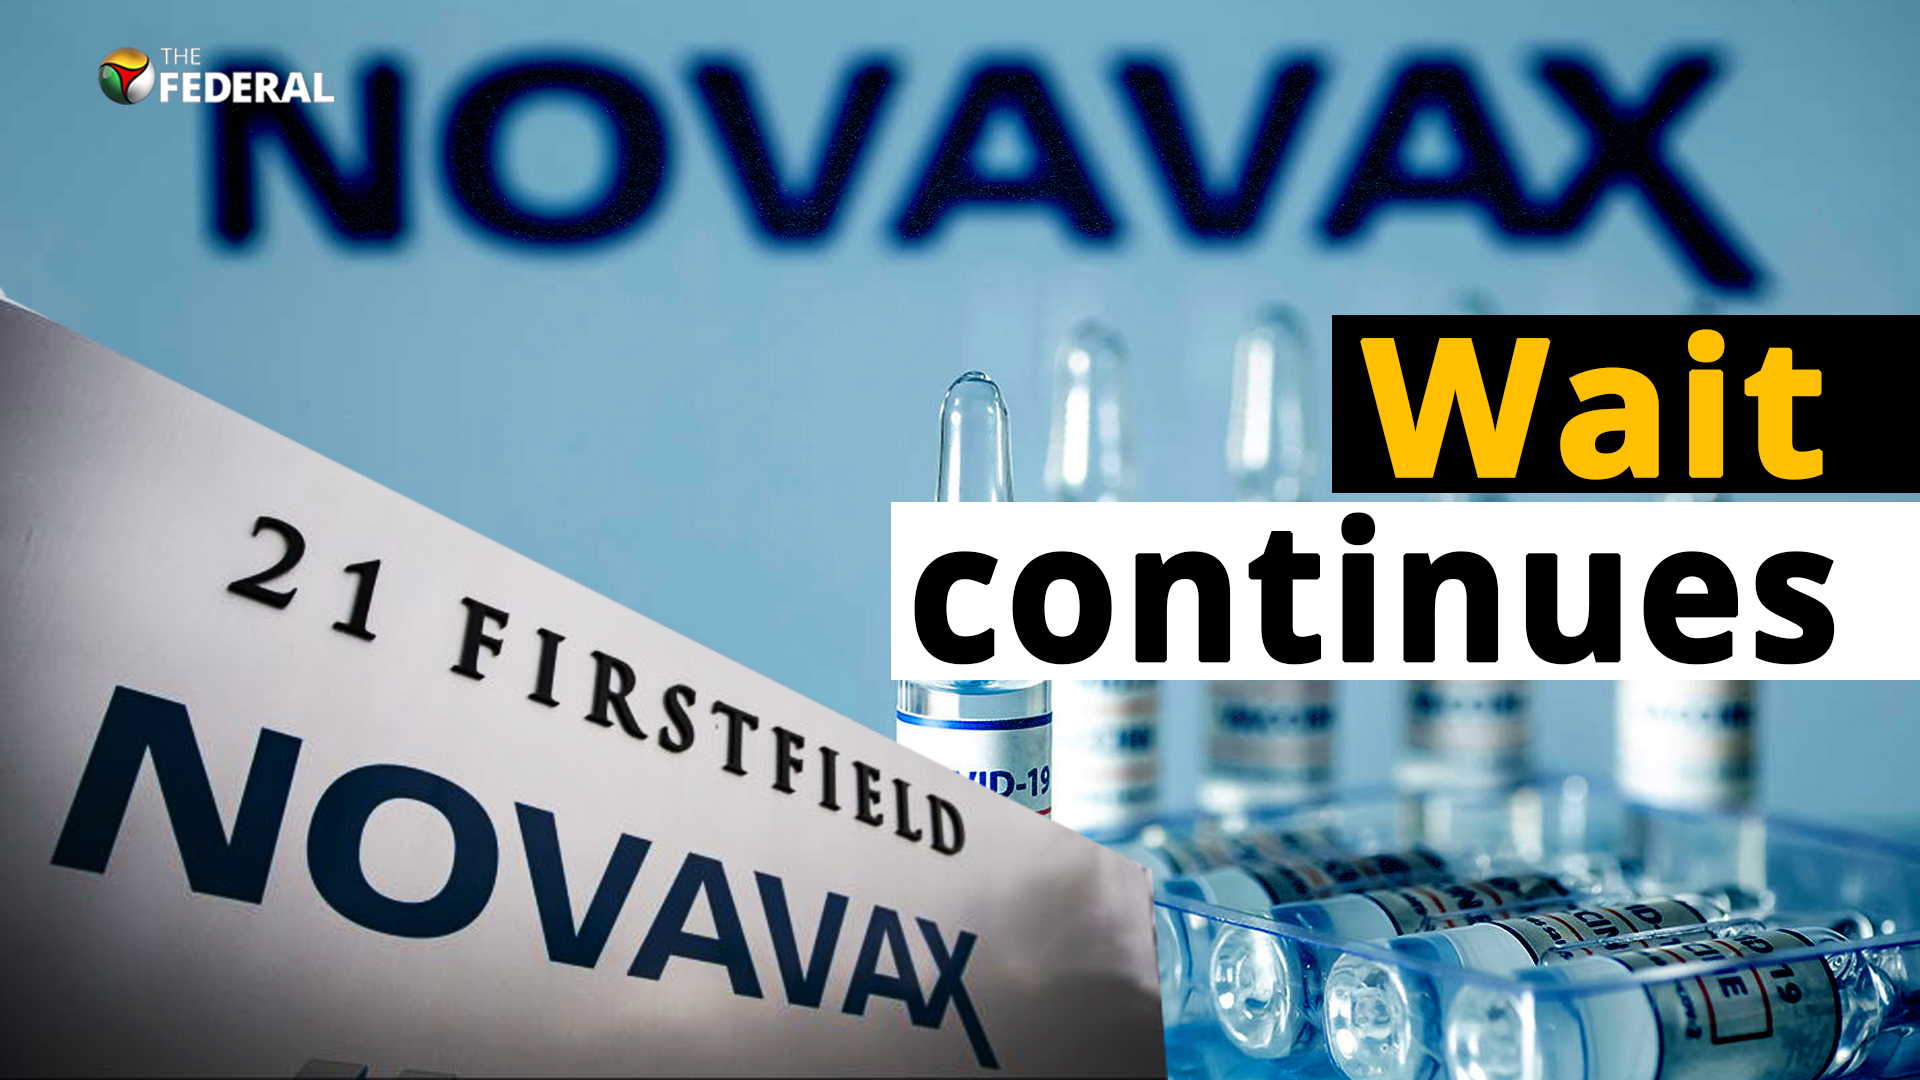 When will we get Covovax vaccine?